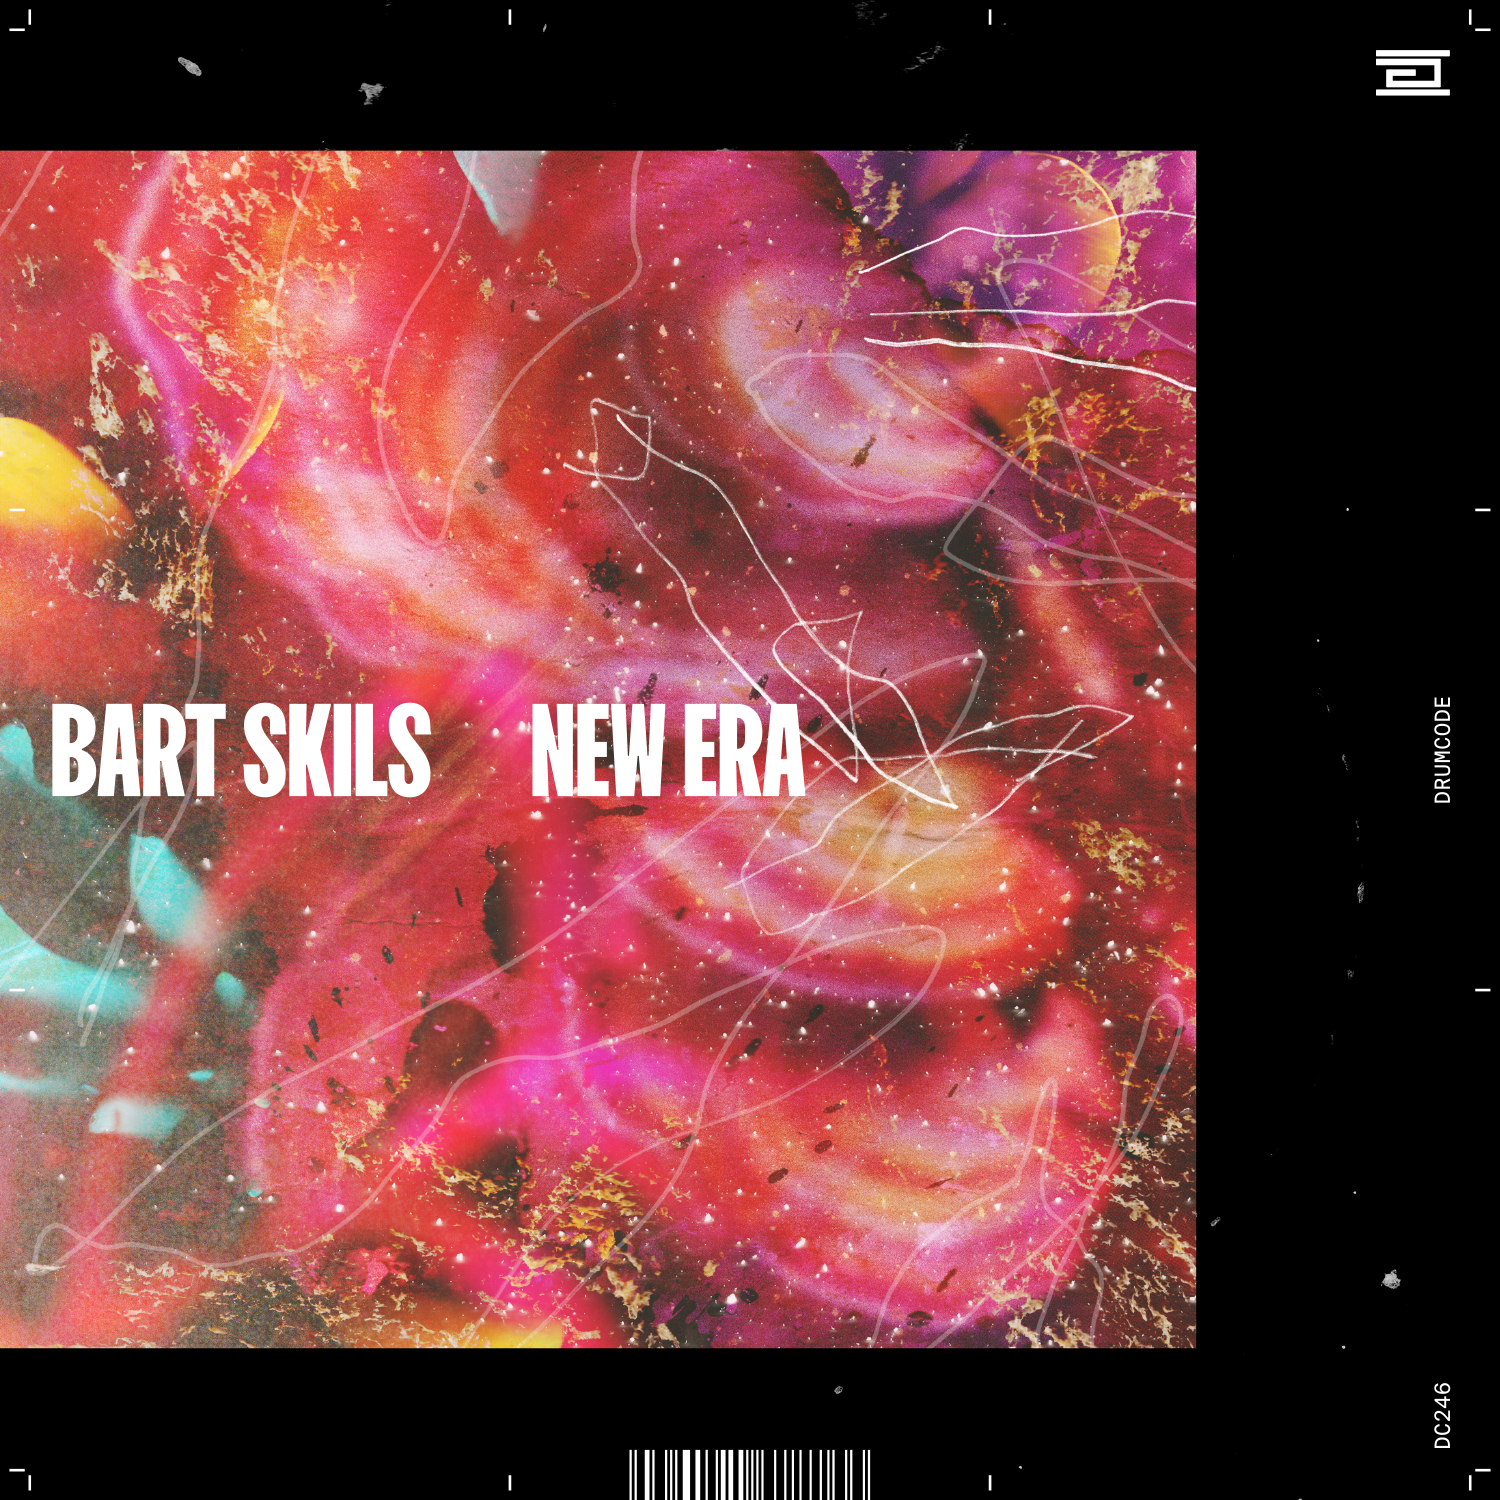 Bart Skils Rings in a ‘New Era’ for Techno This Summer